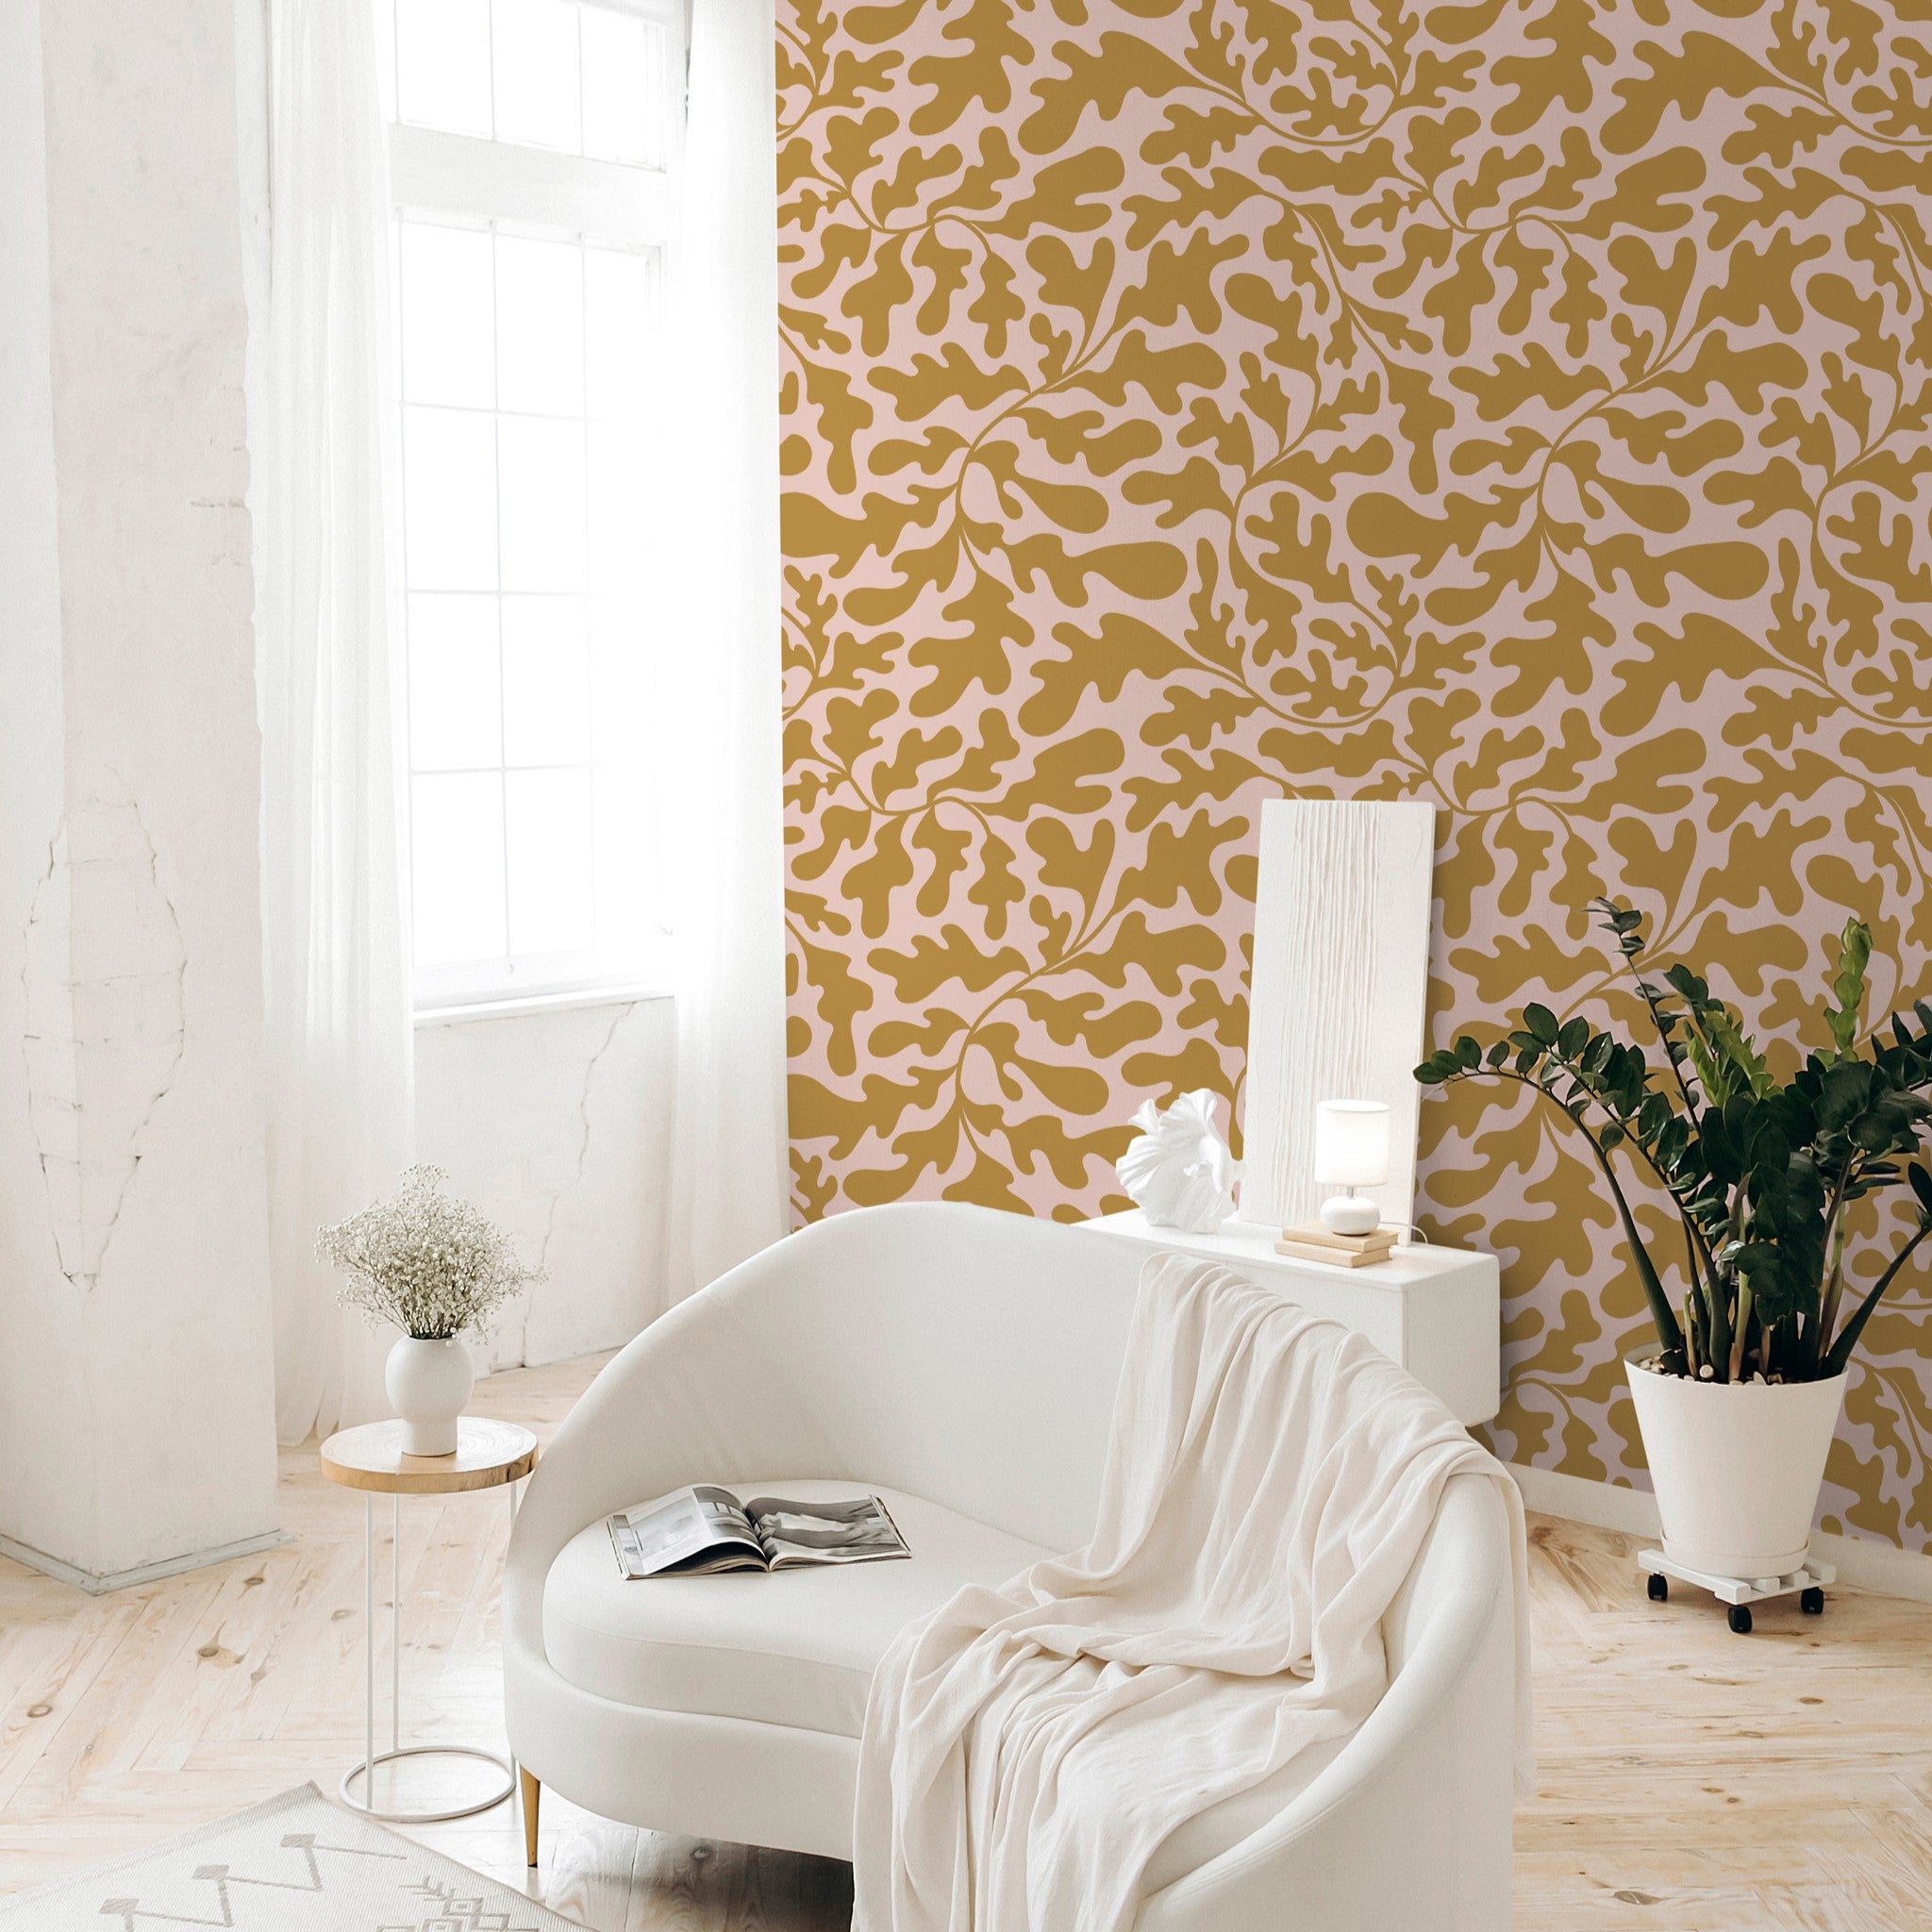 "Tawnie Wallpaper by Wall Blush in elegant living room with modern white sofa and decor accents."